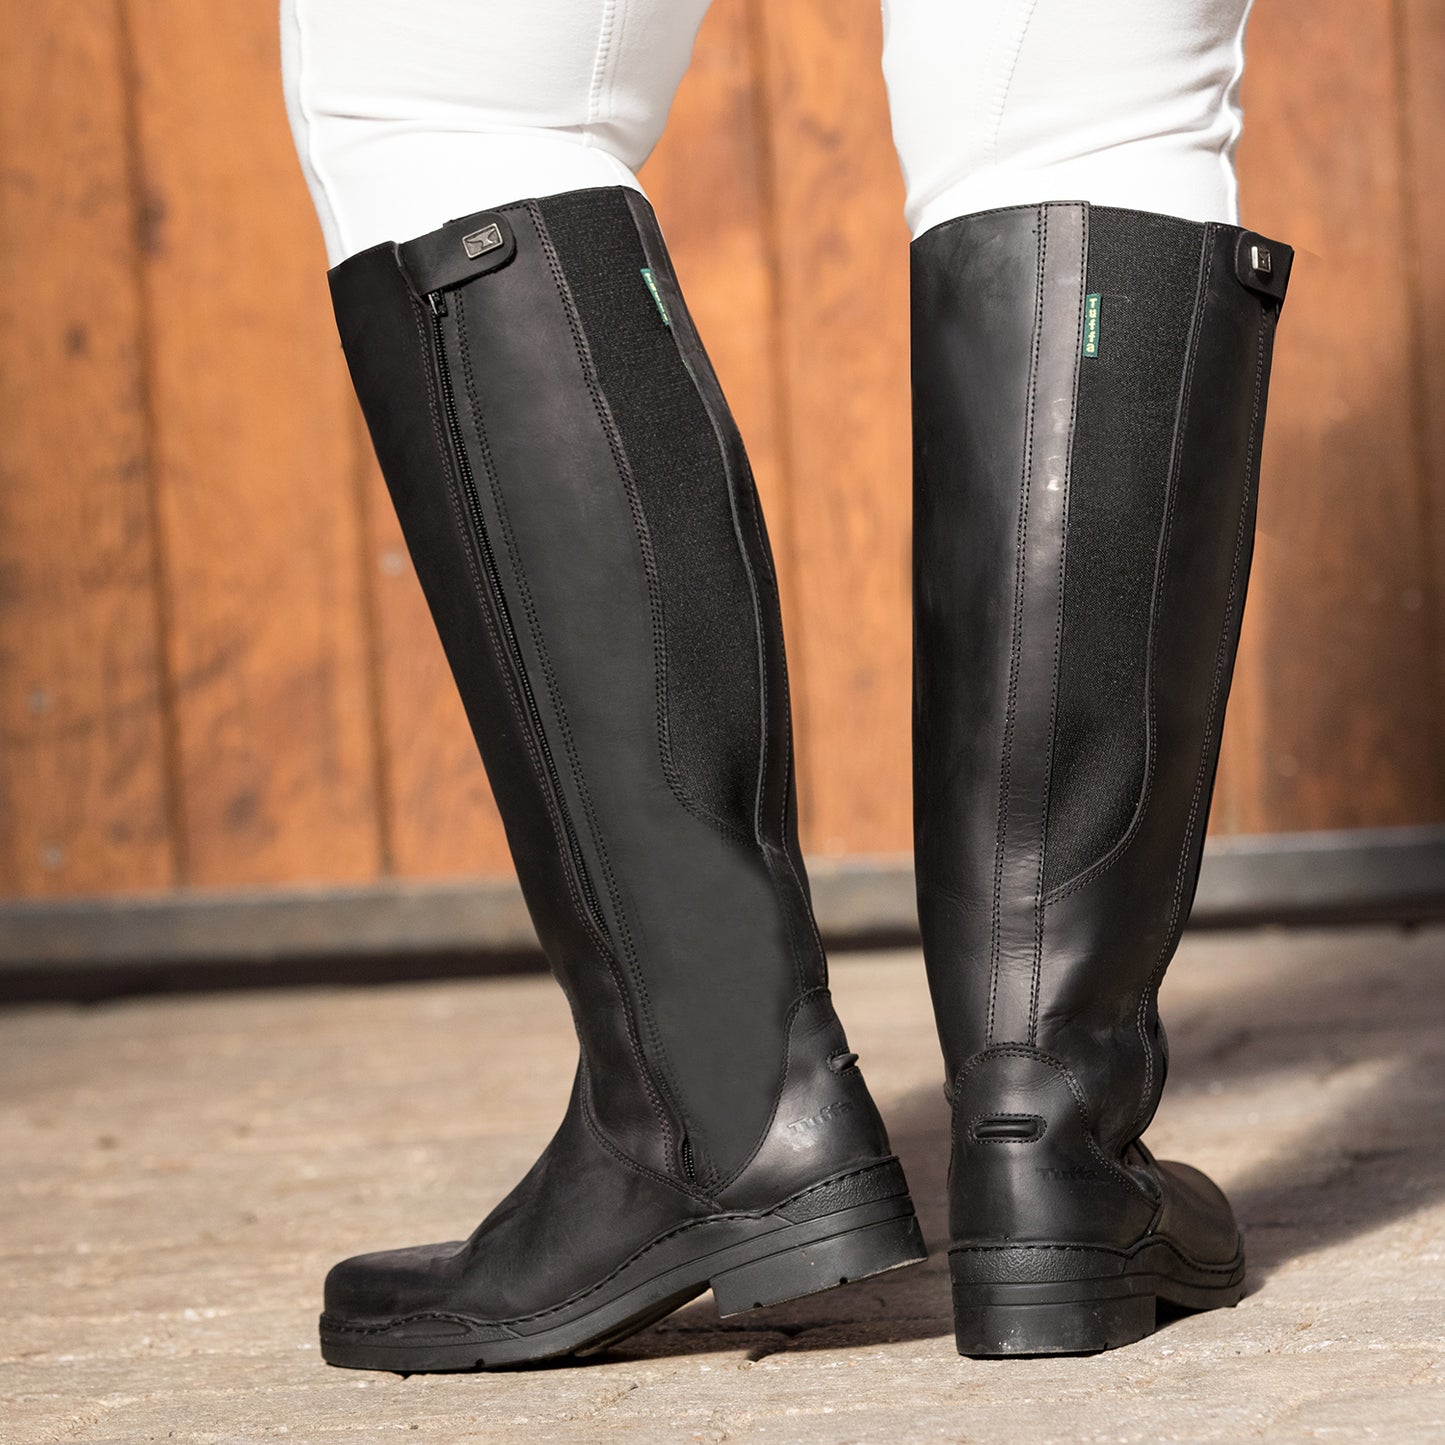 Bespoke Riding Boots, Breckland